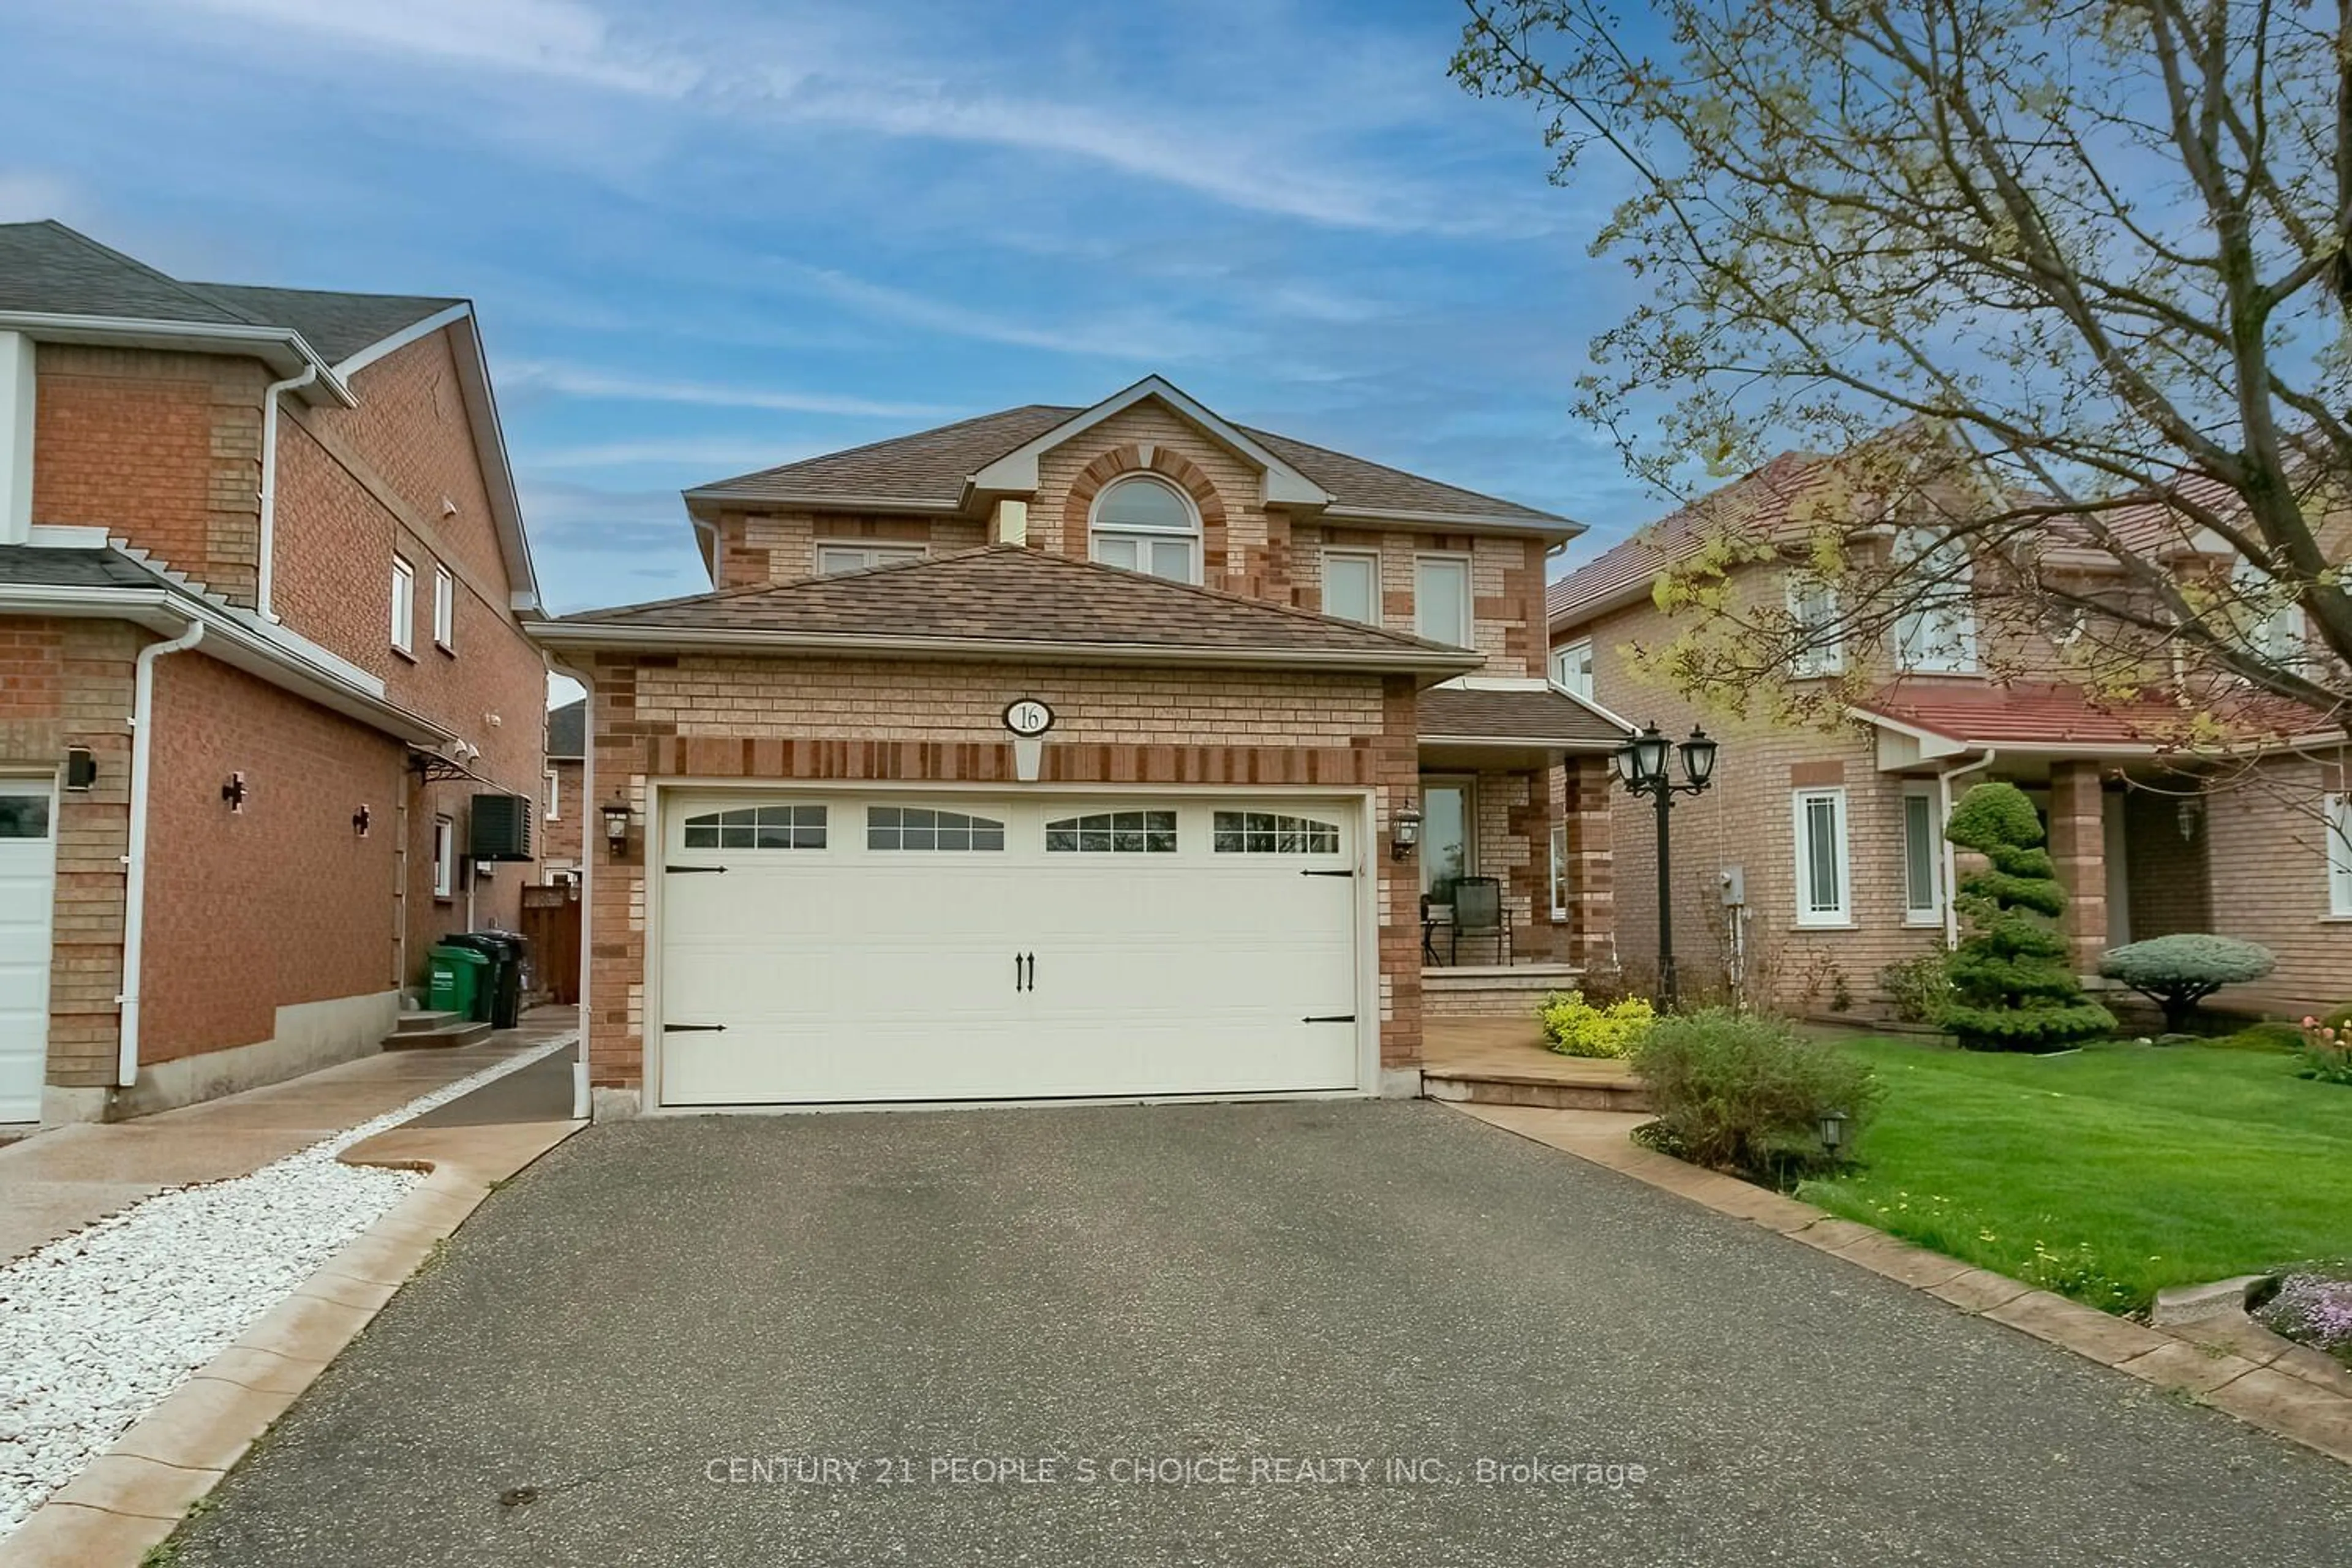 Home with brick exterior material for 16 Sterritt Dr, Brampton Ontario L6Y 5E4